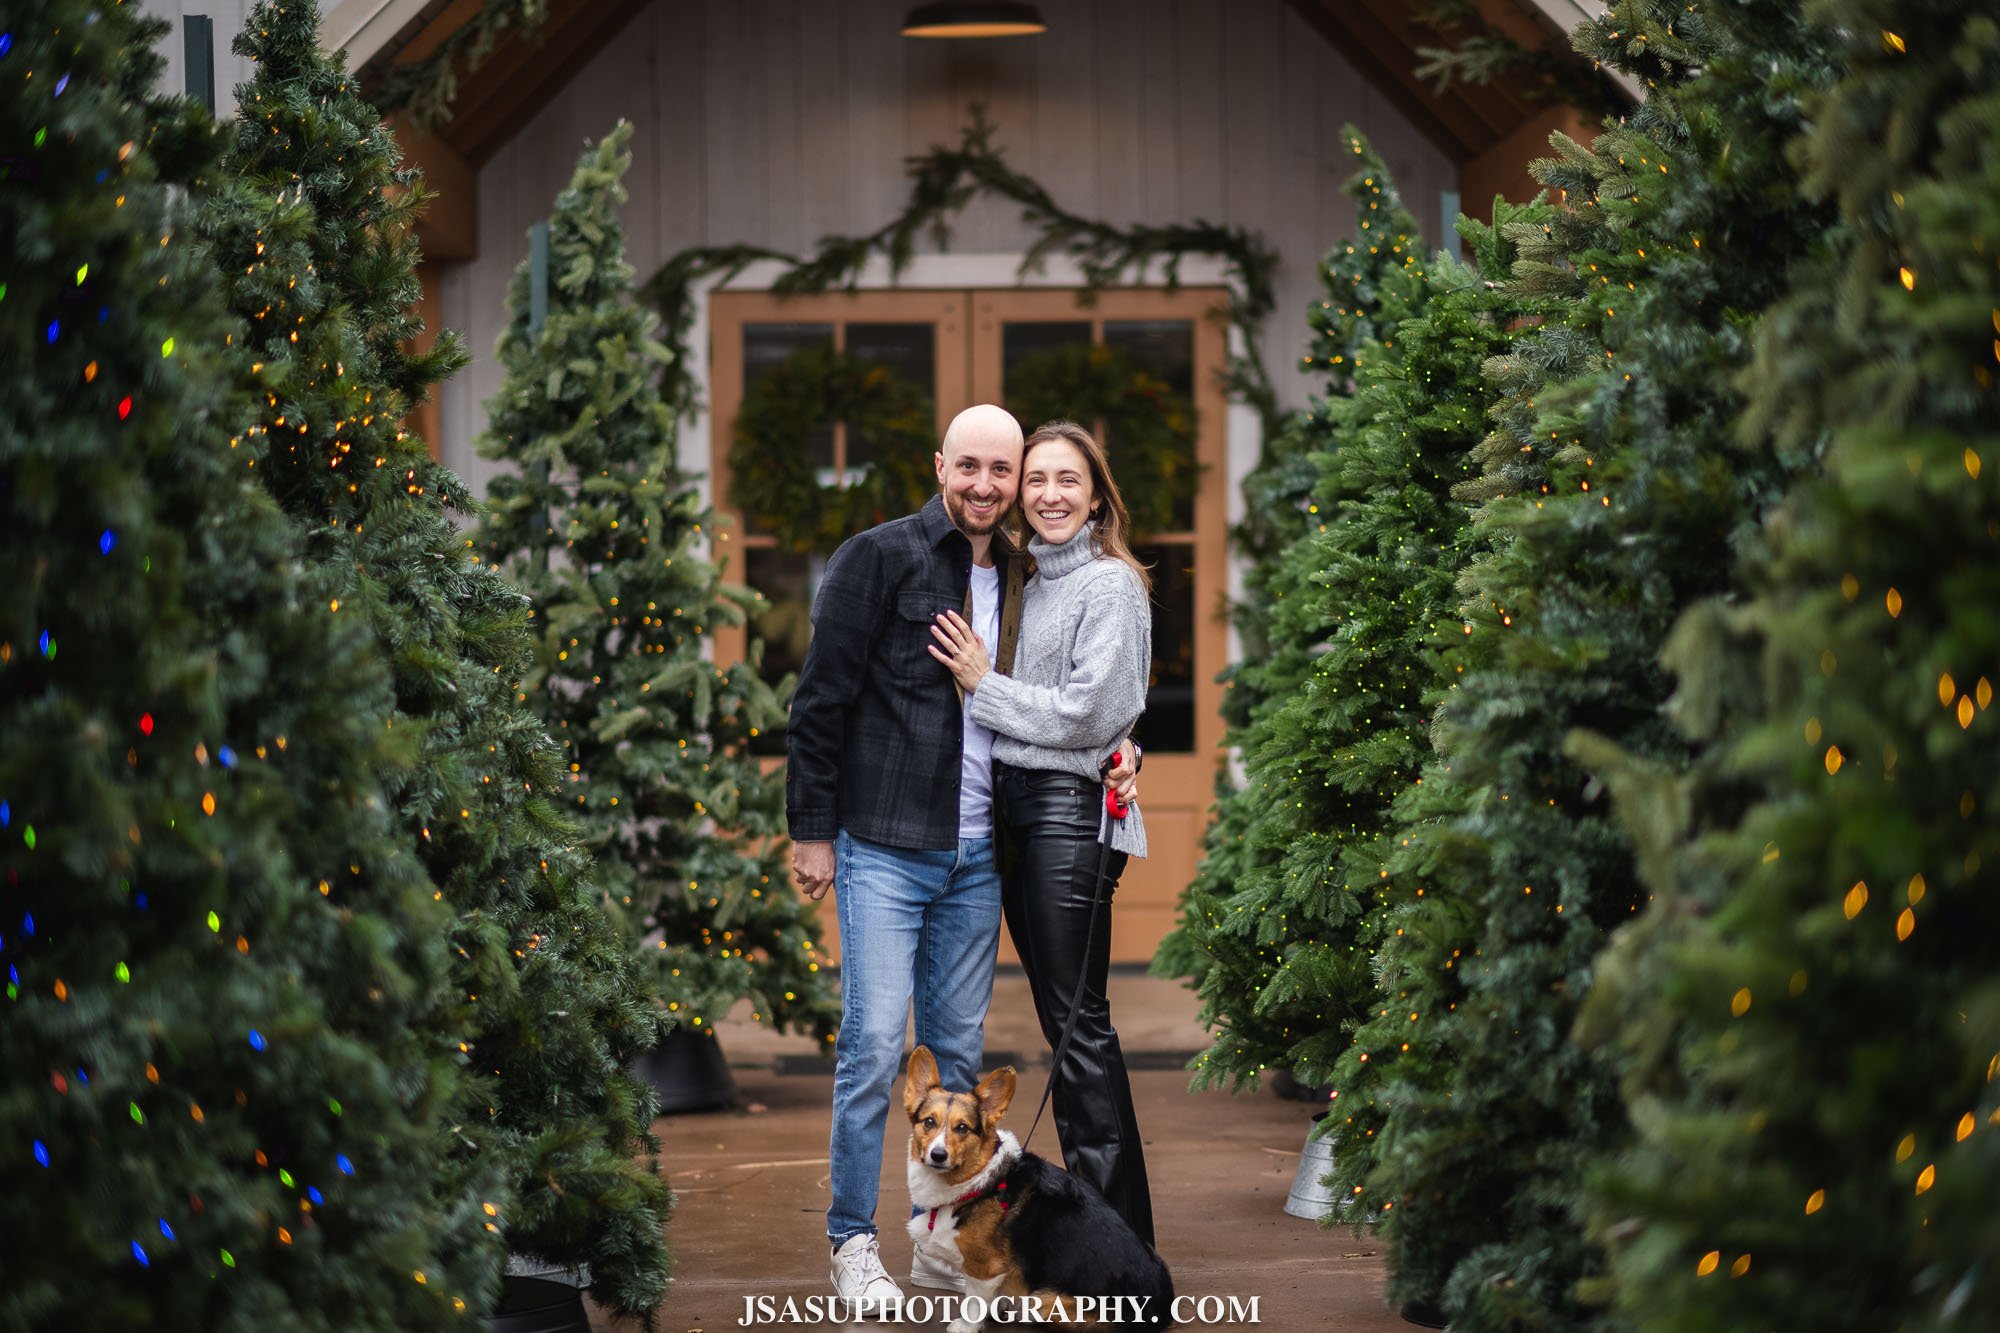 drew-alex-surprise-proposal-photos-old-westminister-winery-jsasuphotography-21.jpg